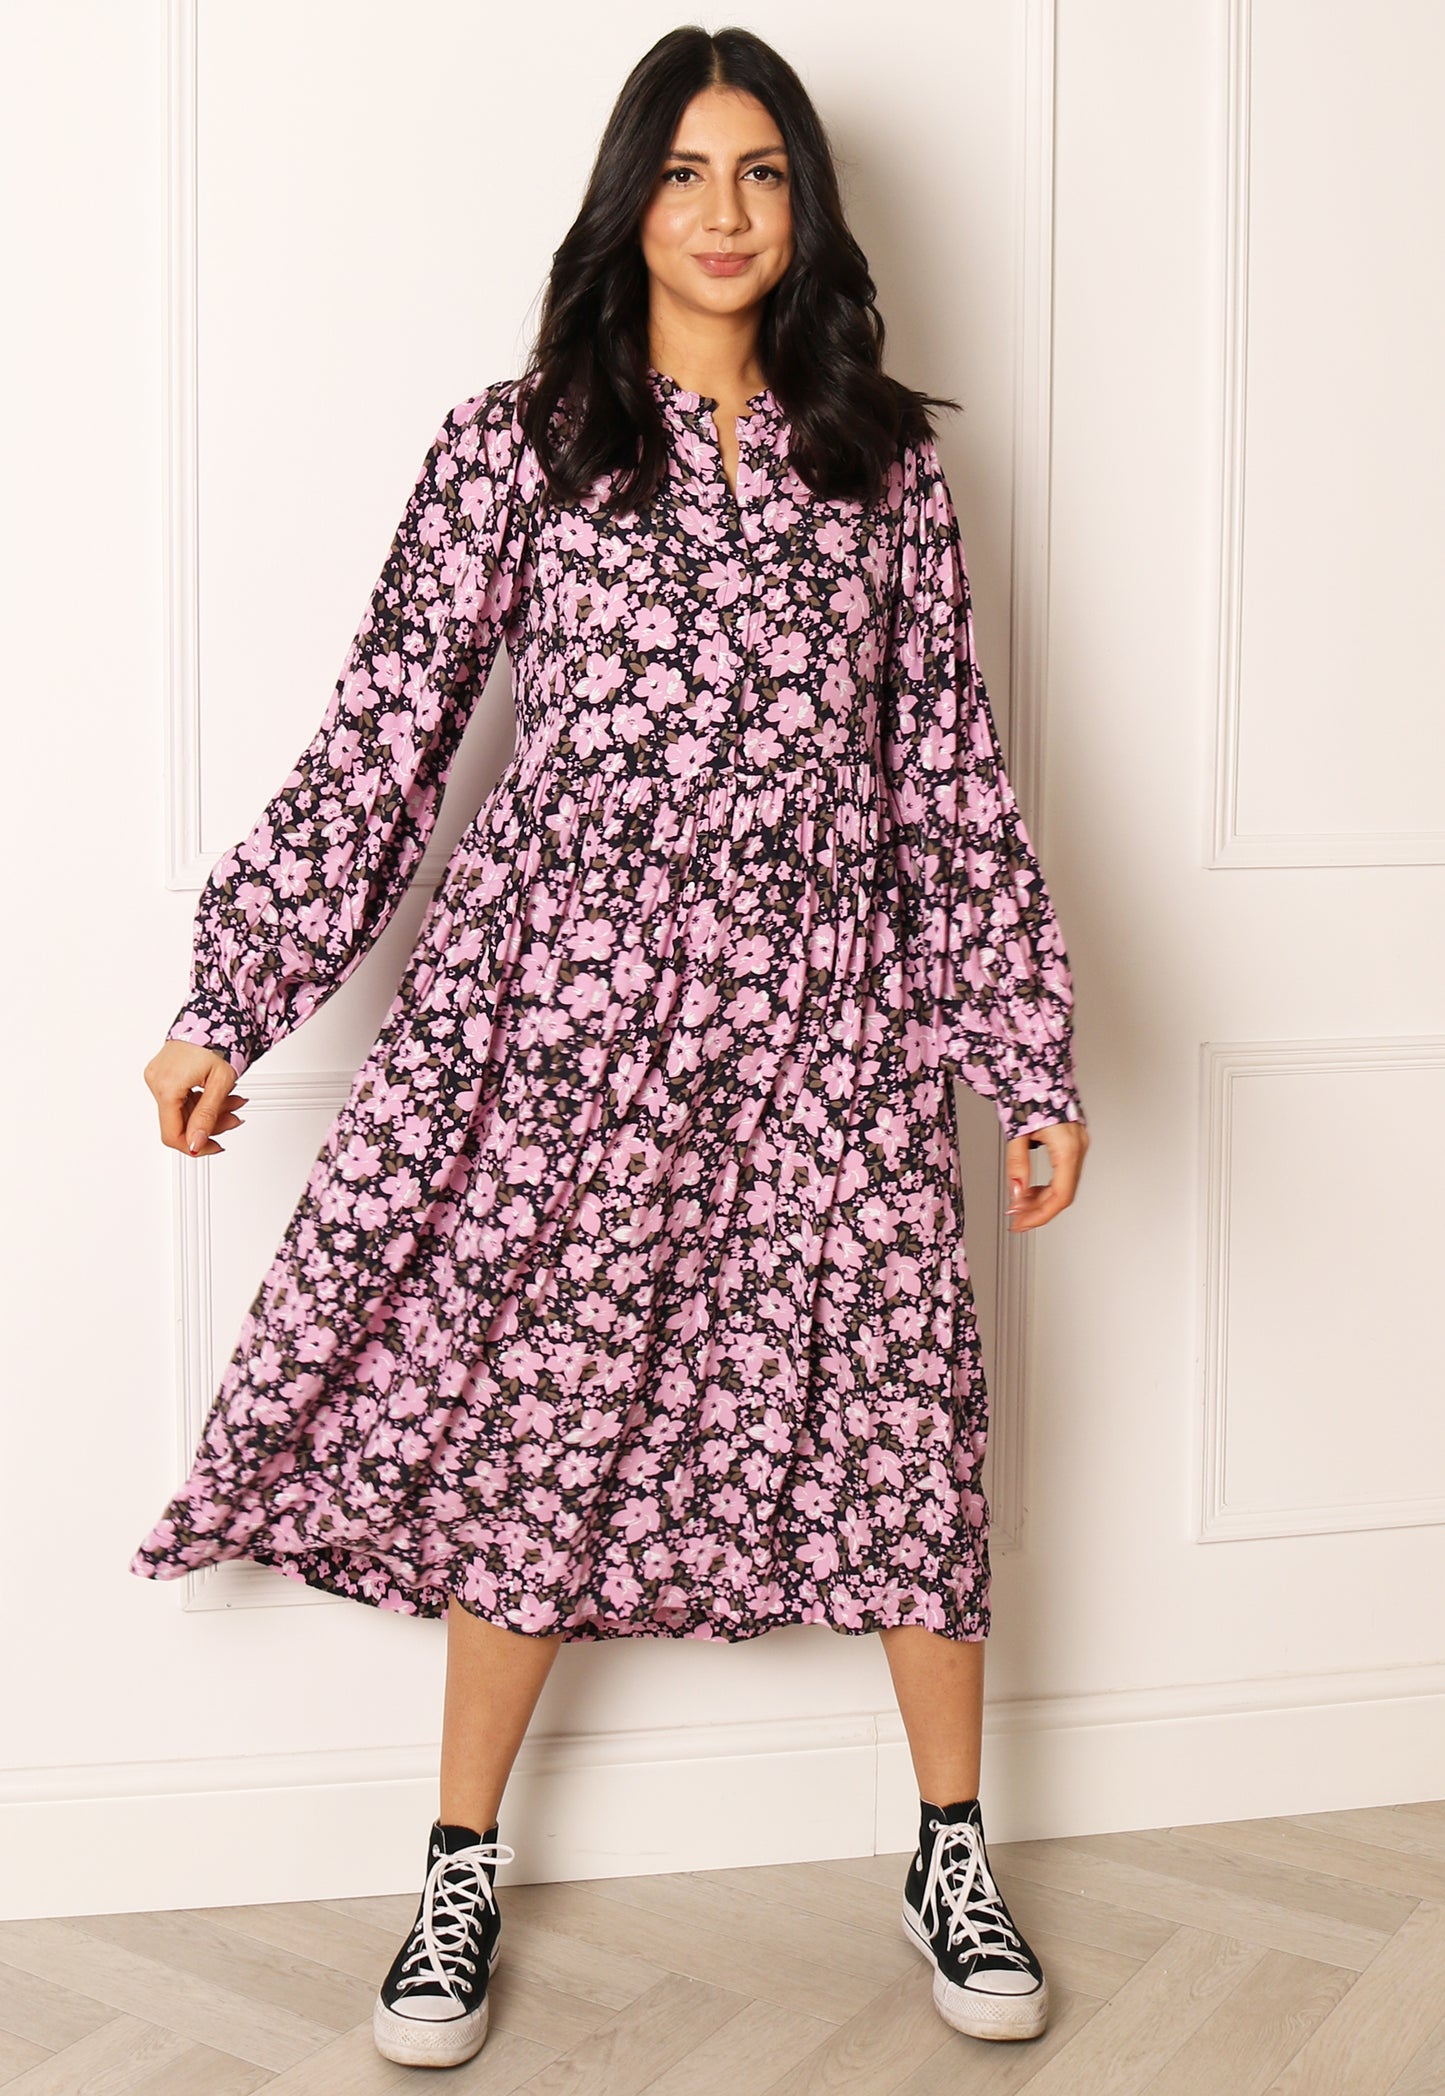 PIECES Athena Floral Smock Midi Dress in Black & Pink - One Nation Clothing